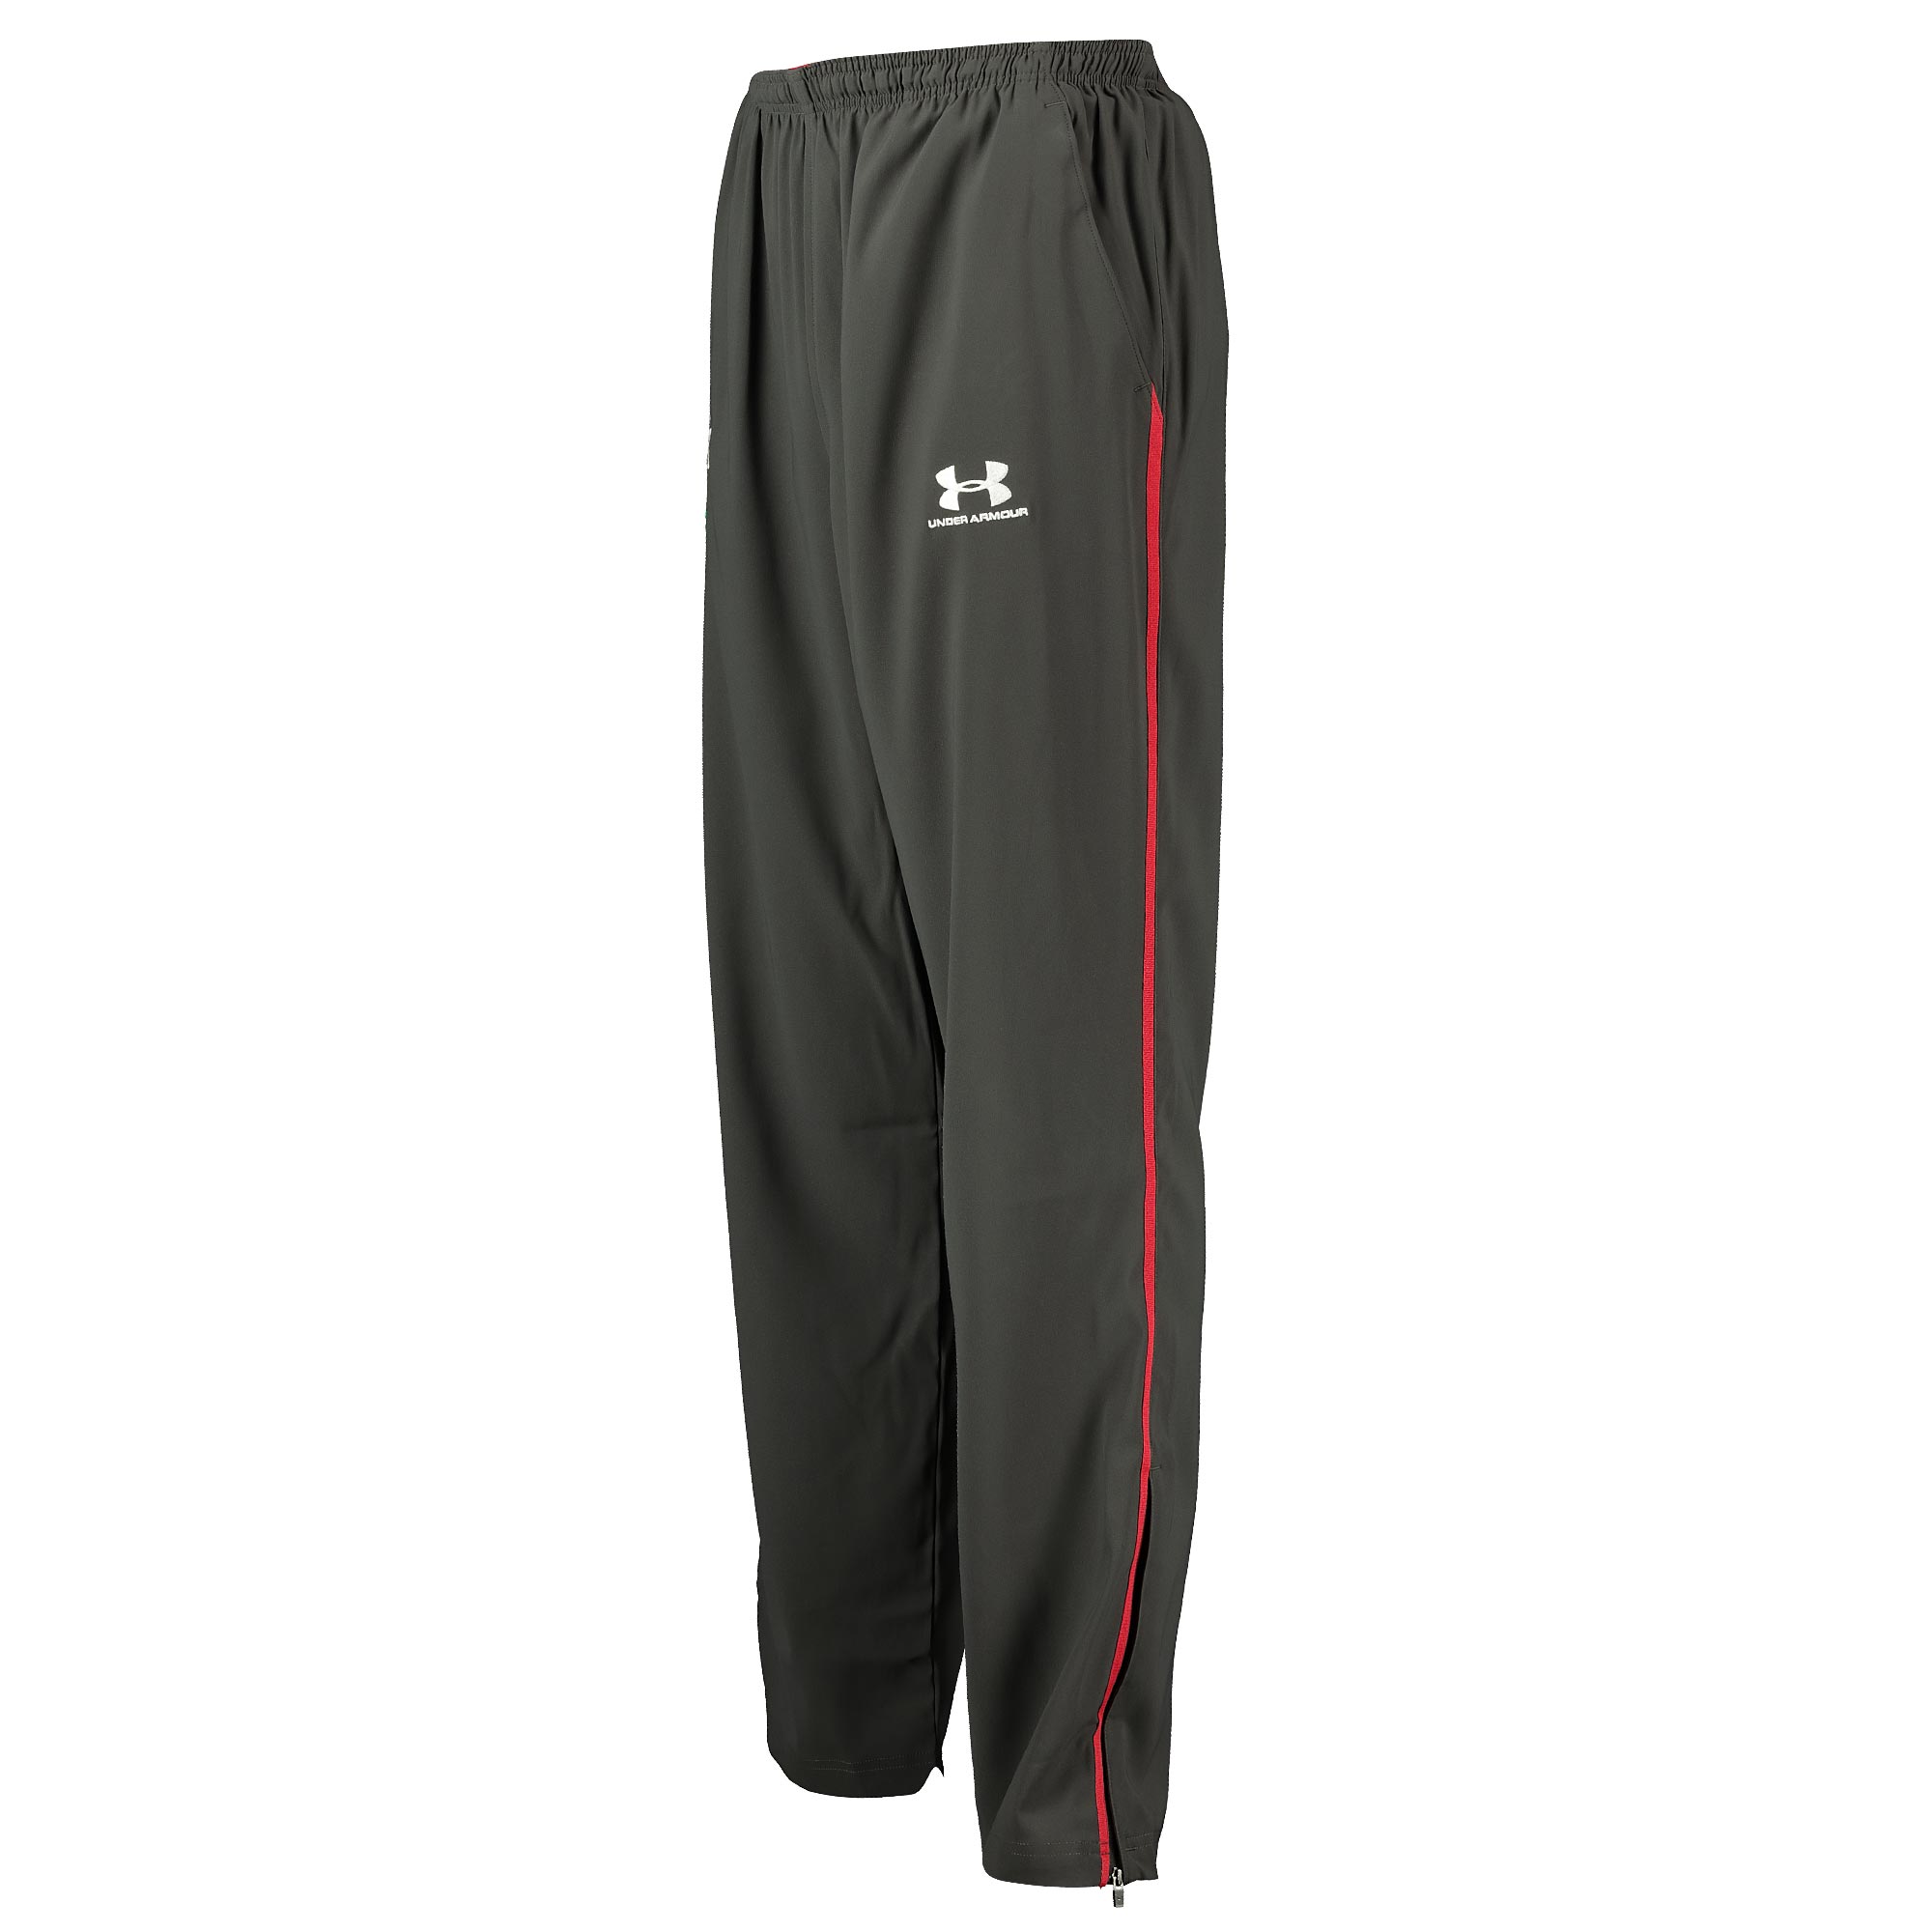 WALES RUGBY GREY TRAVEL PANTS BY UNDER ARMOUR SIZE MEN'S MEDIUM BRAND NEW 